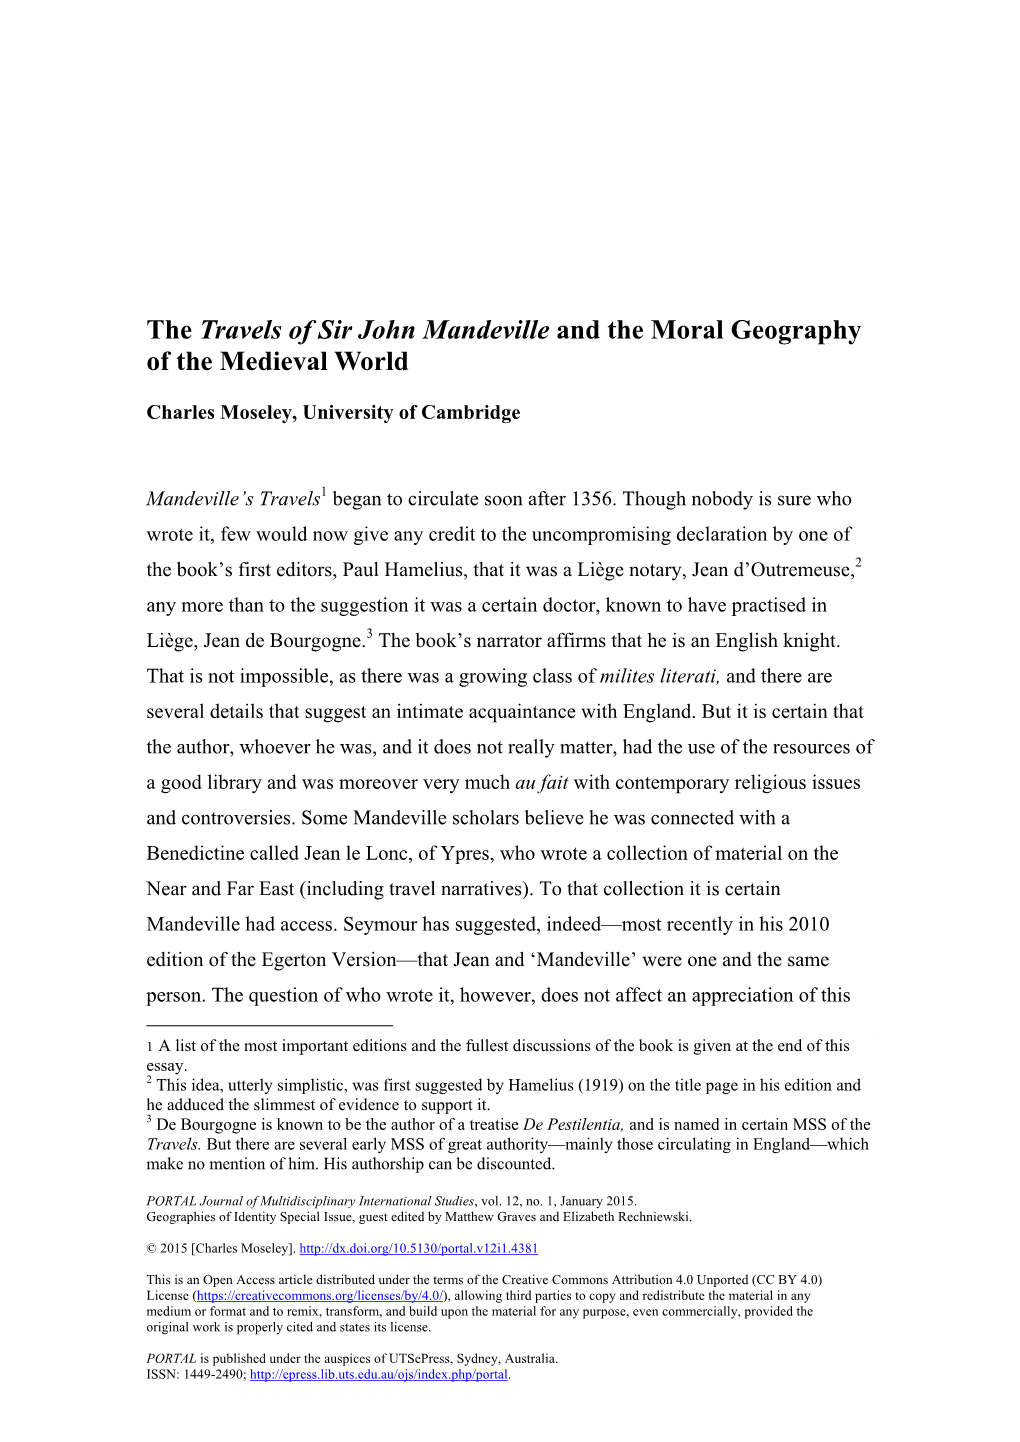 The Travels of Sir John Mandeville and the Moral Geography of the Medieval World